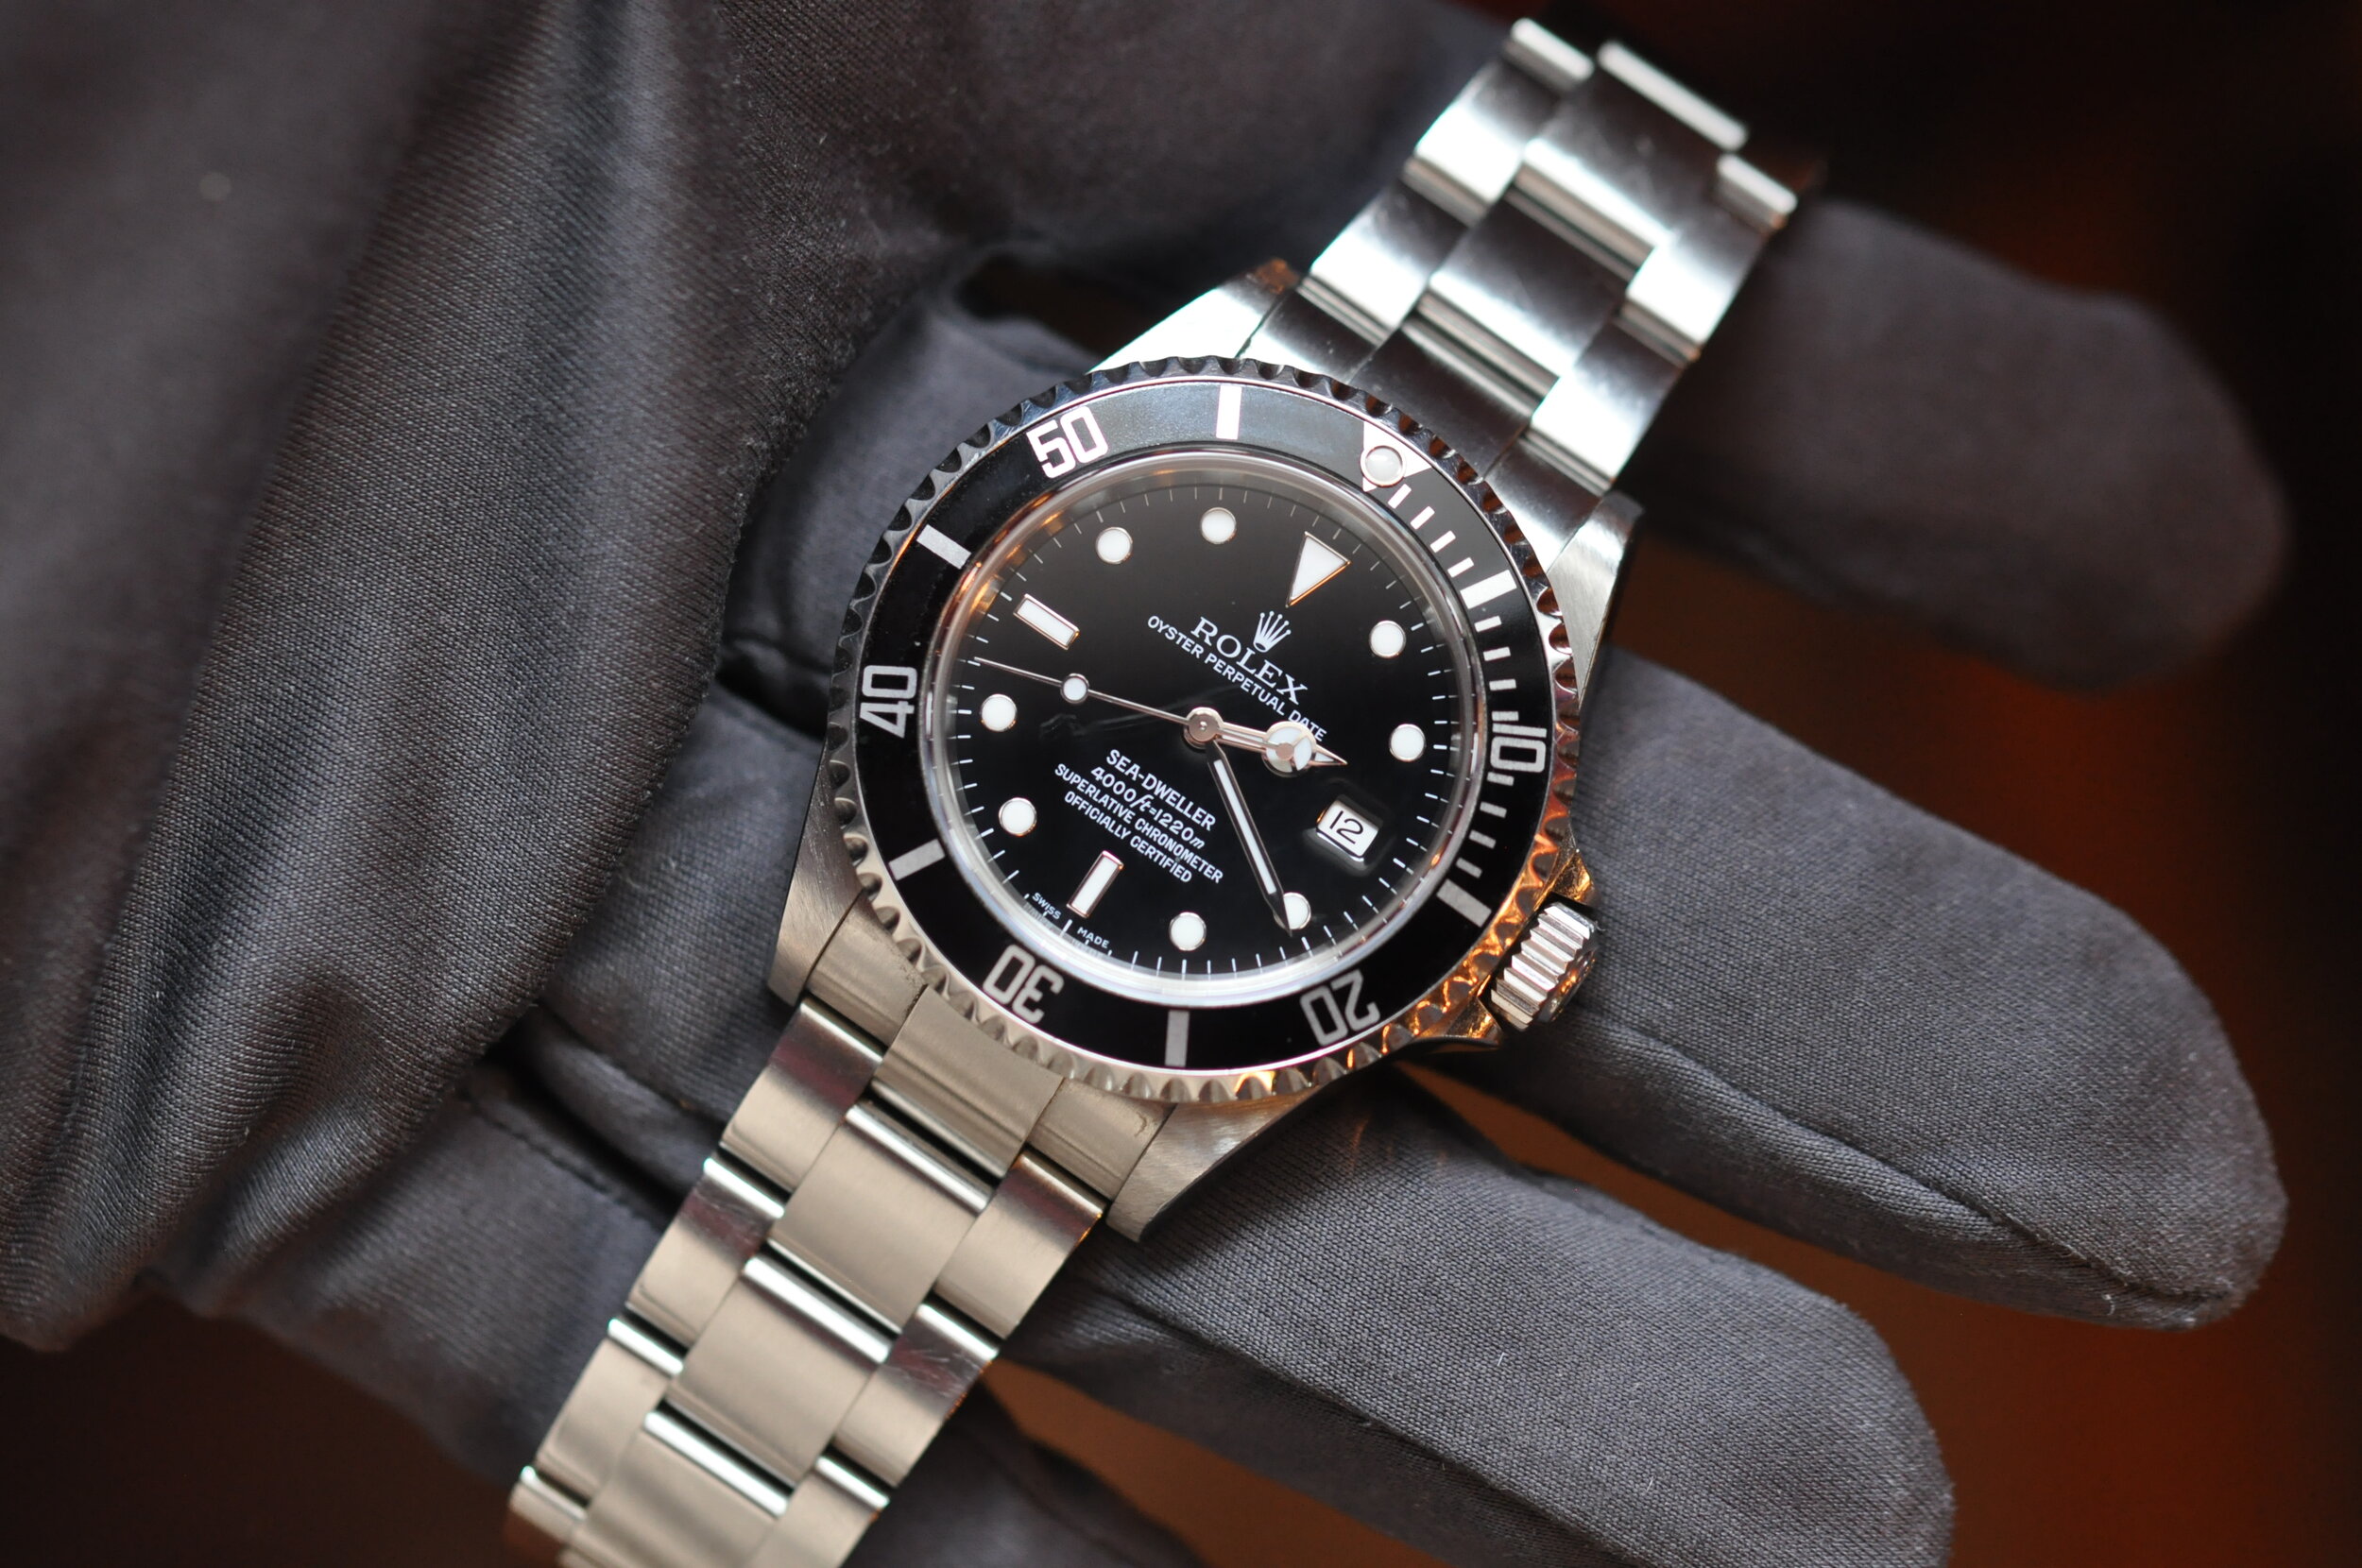 Diving deep: The Sea-Dweller 16600 and 